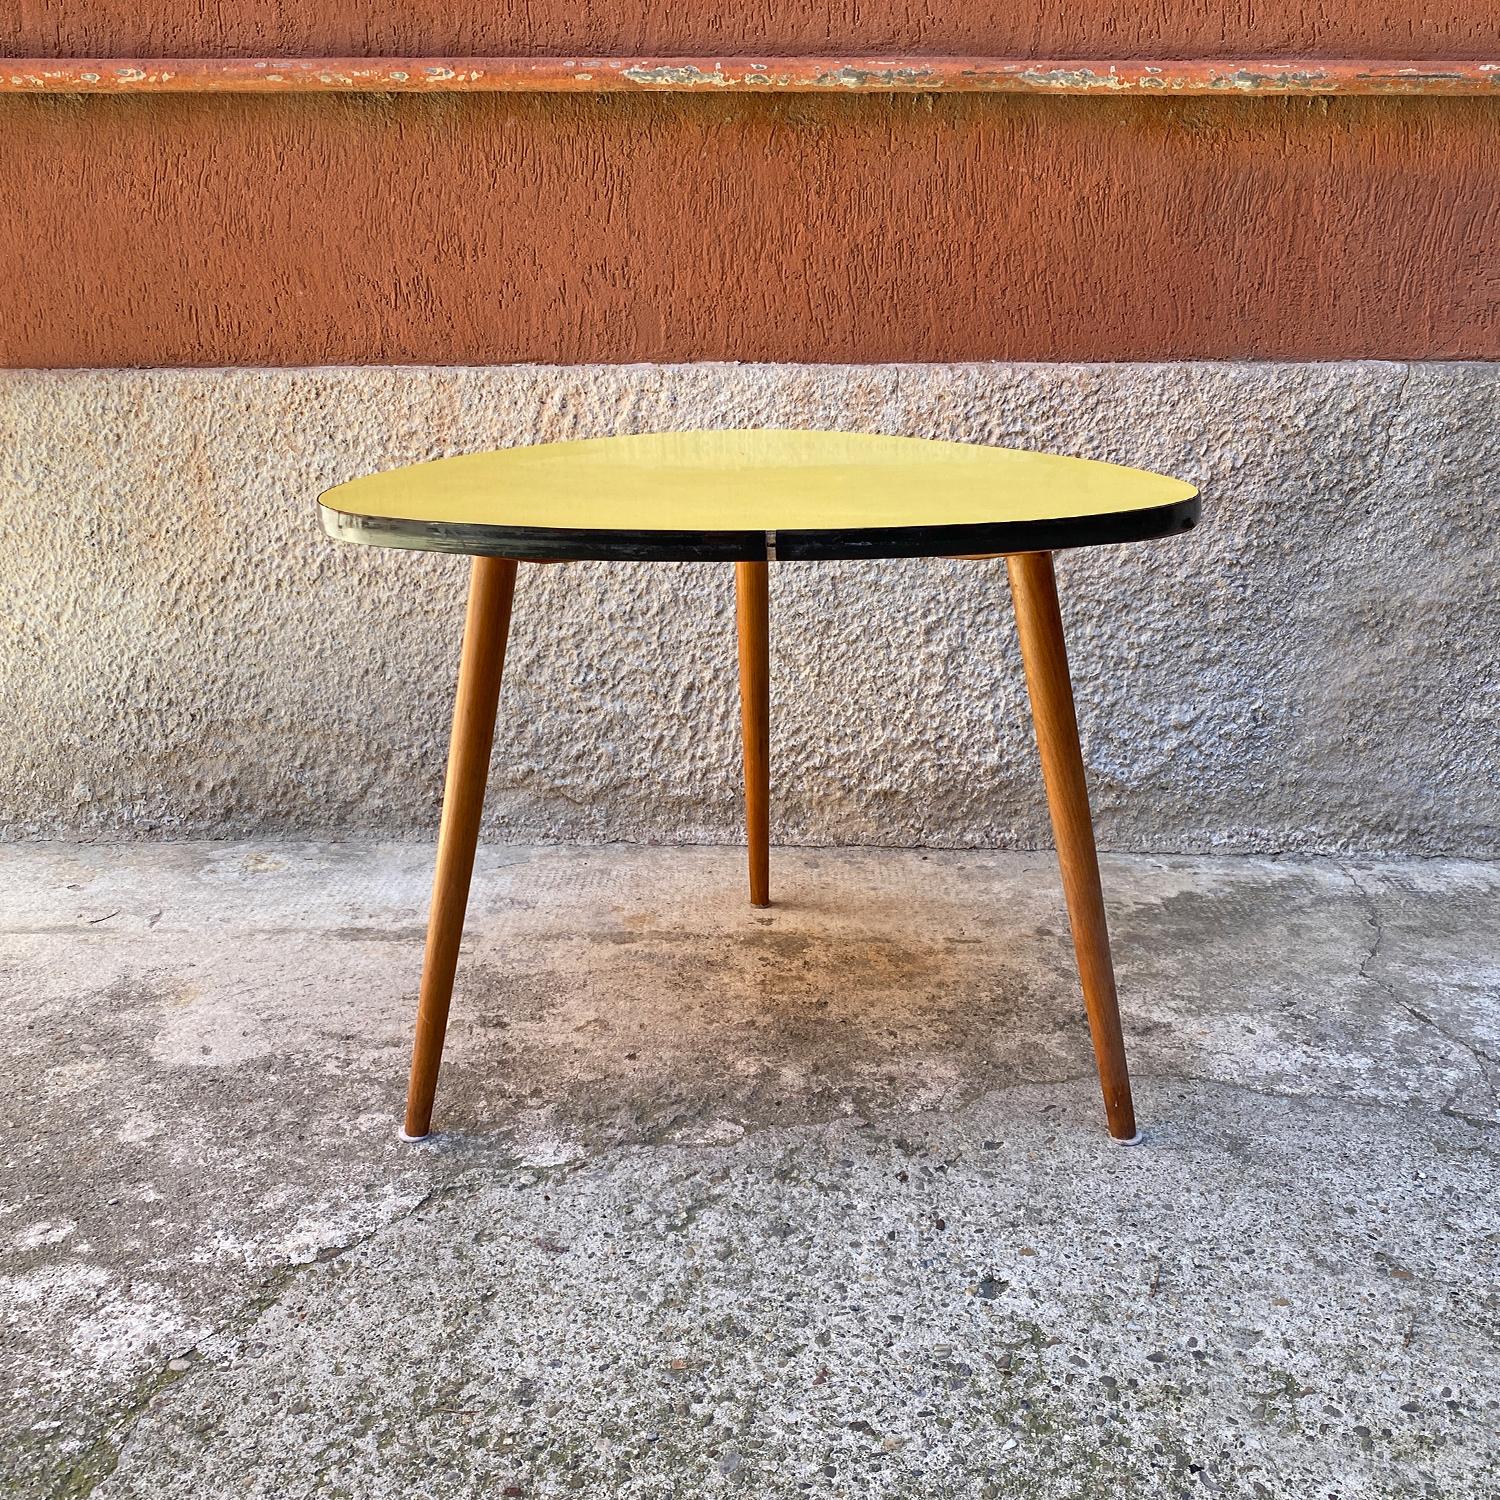 Northern European yellow coffee table with original solid beech legs, 1960s
Yellow coffee table of northern European origin, with yellow Formica top with rounded corners, original of the time and with legs in solid beech.

Good general